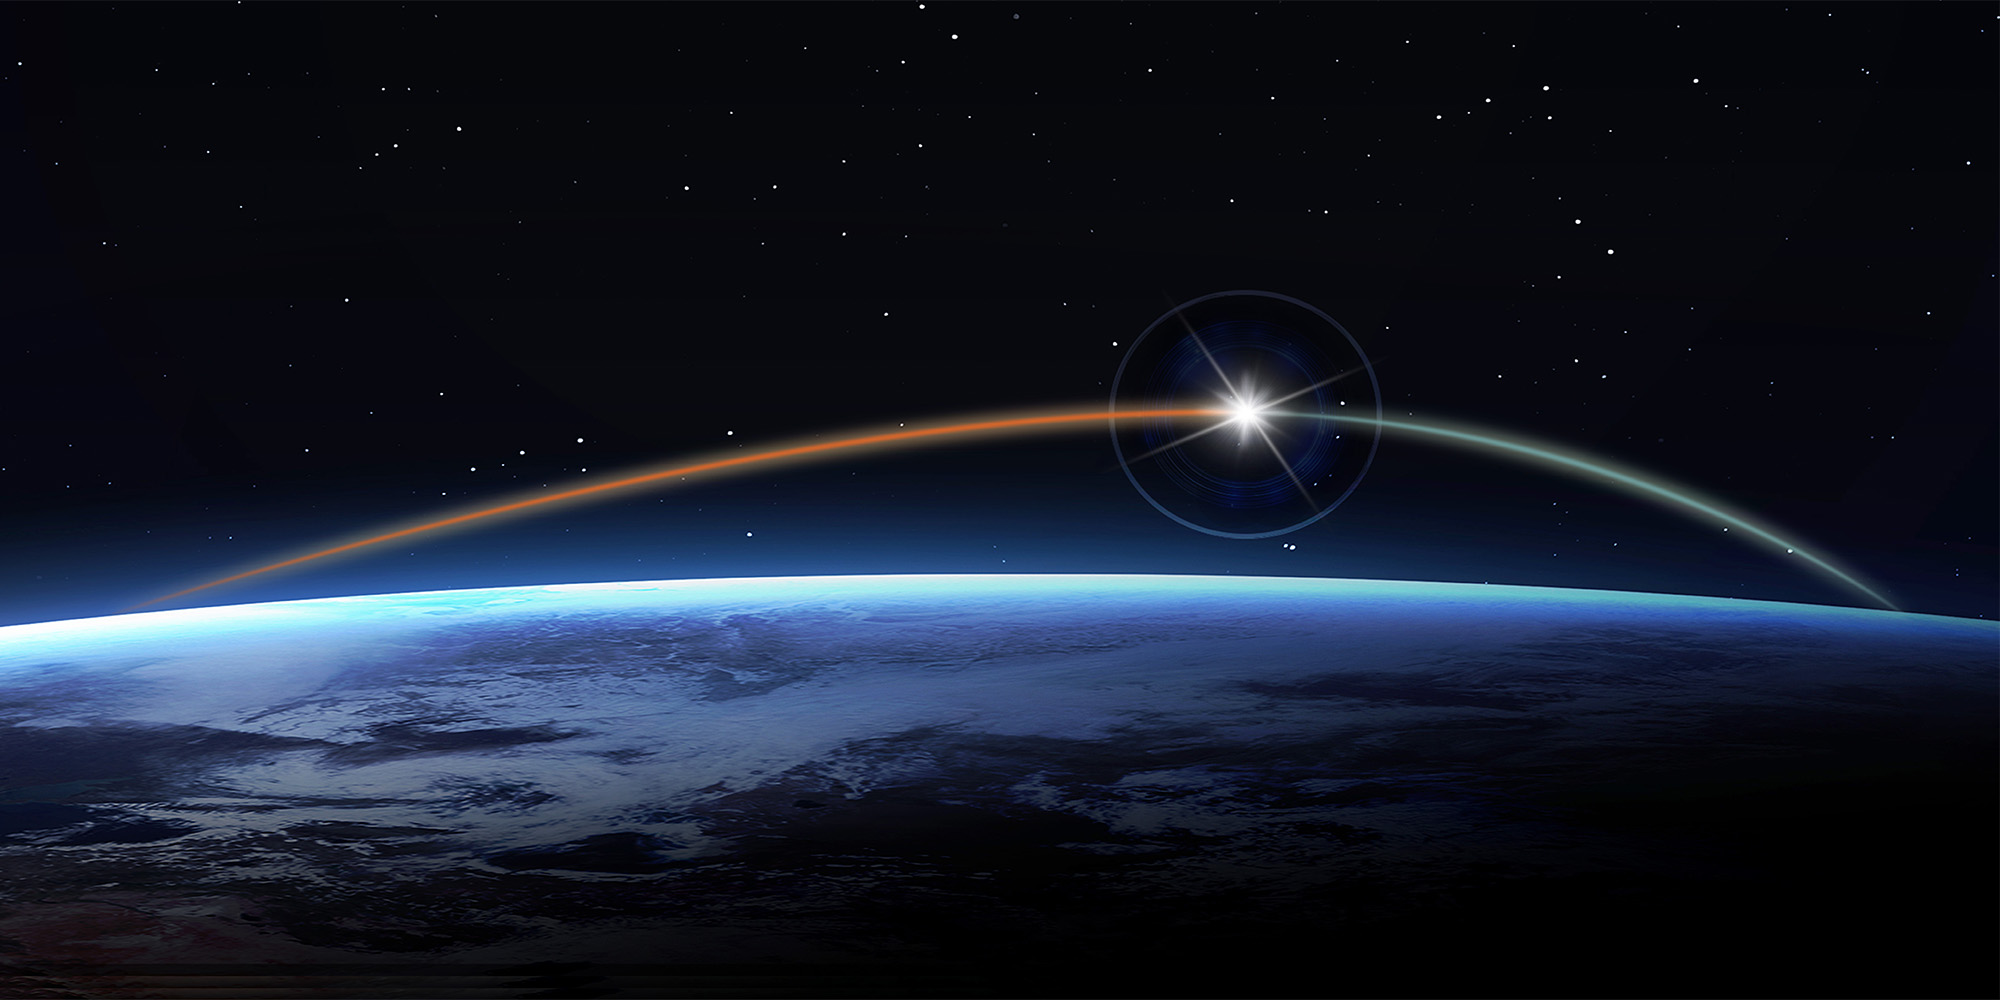 Twilit sky in space with a bright star and streak arching over Earth